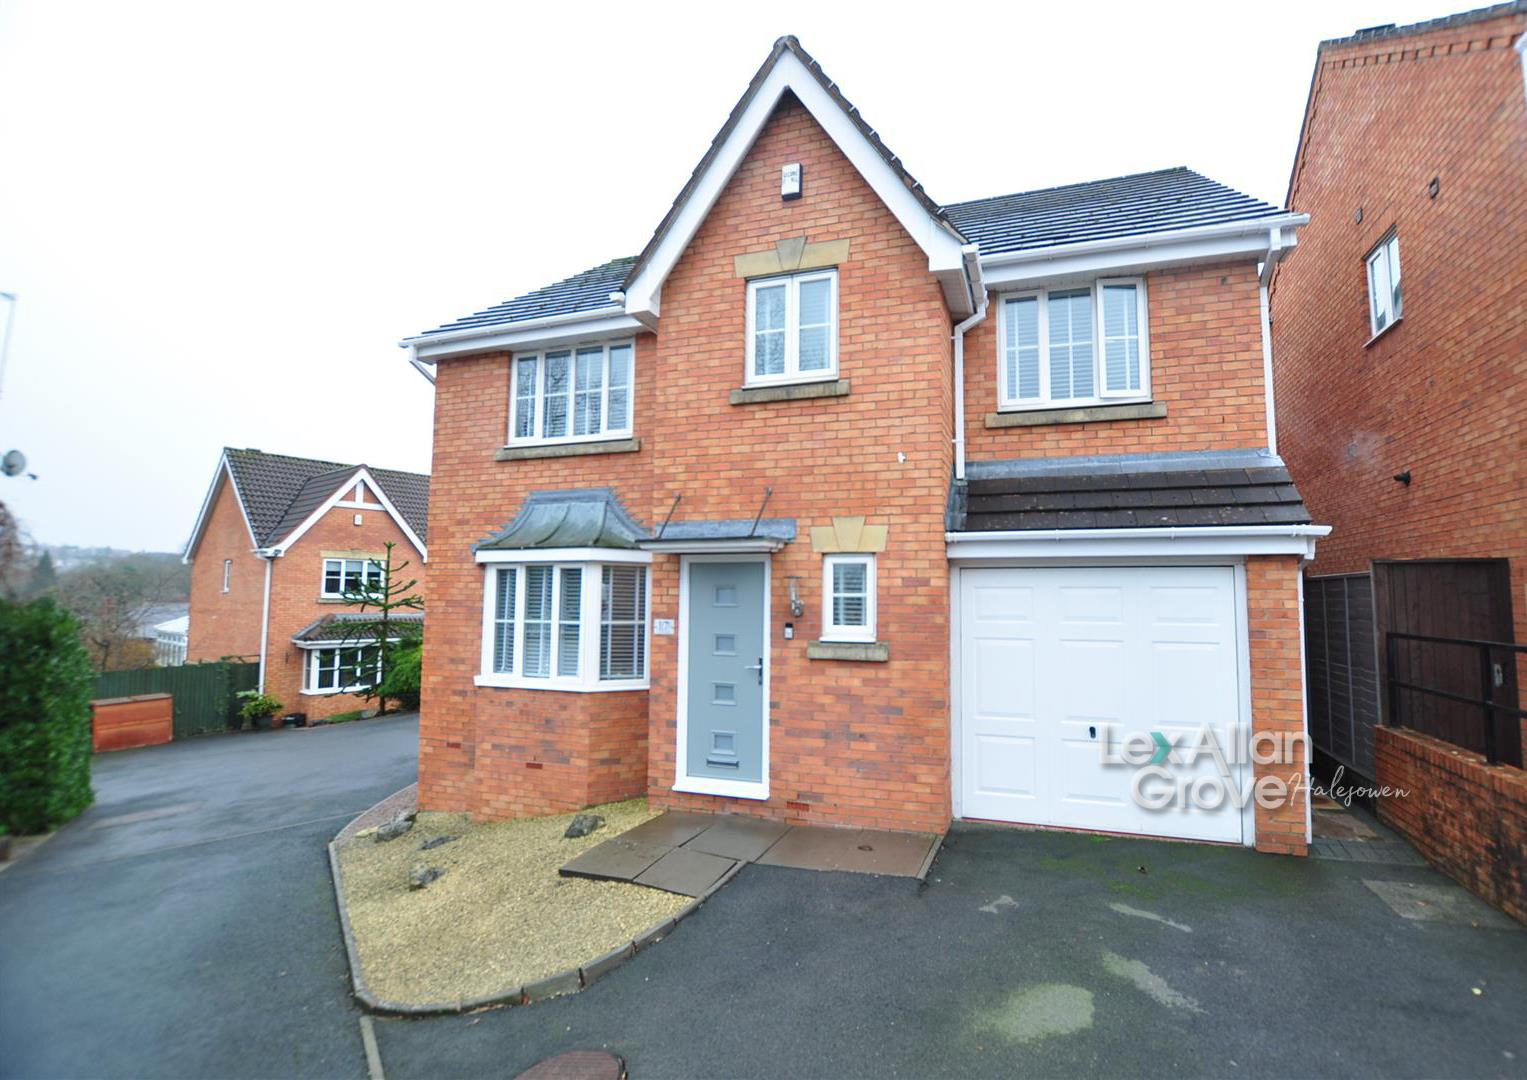 4 bed detached house for sale in Rowley Hill View, Cradley Heath, B64 